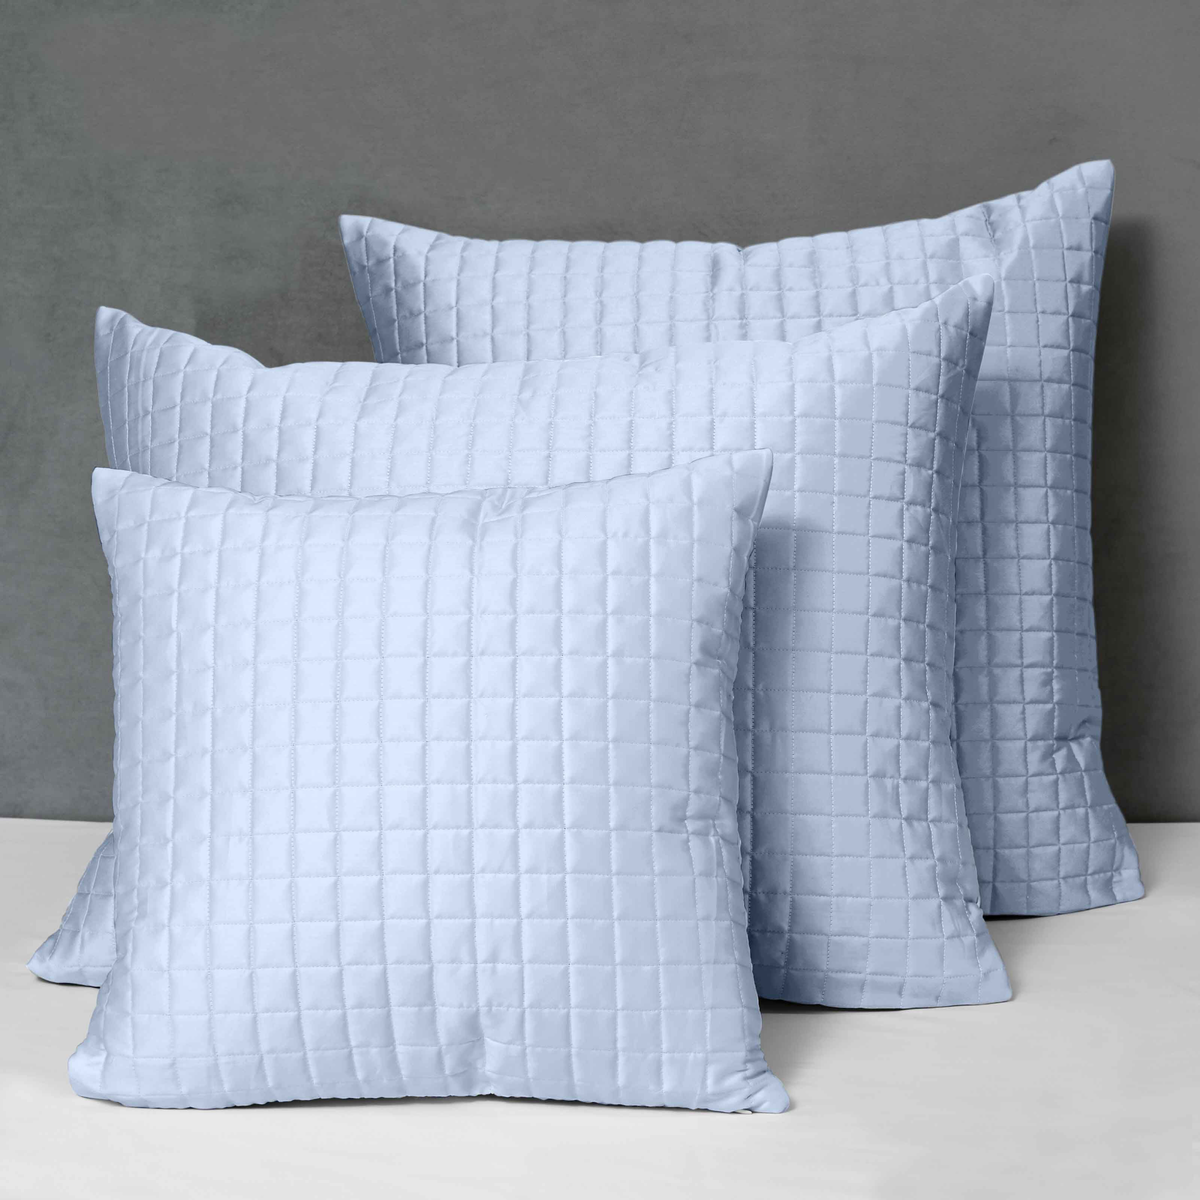 Different Sizes of Quilted Shams of Signoria Masaccio Bedding in Sky Blue Color